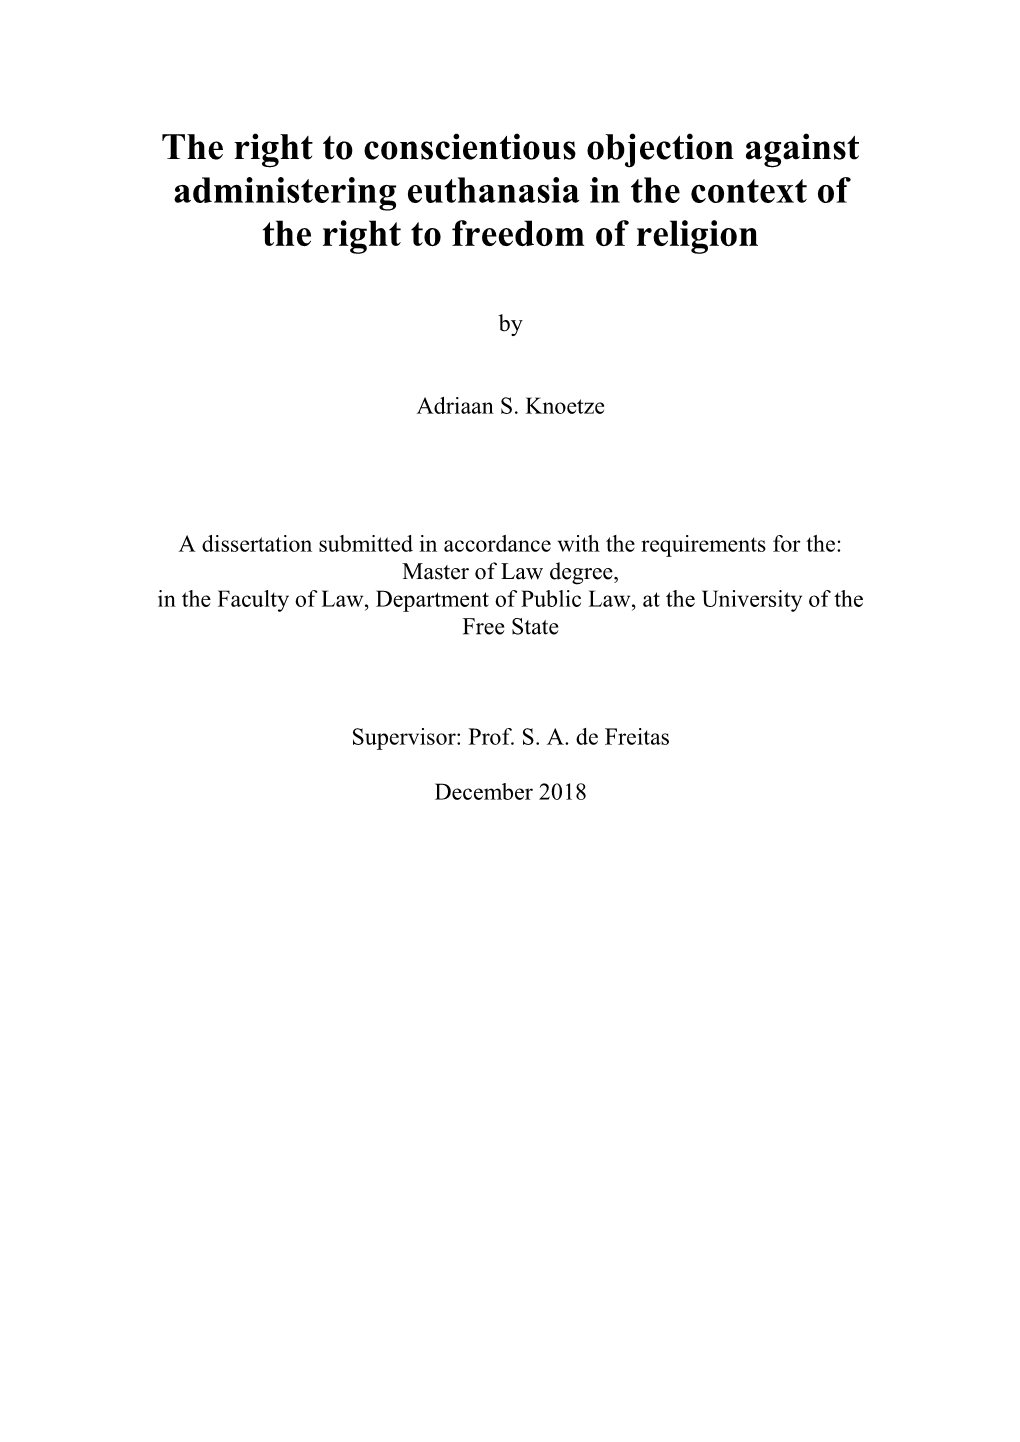 The Right to Conscientious Objection Against Administering Euthanasia in the Context of the Right to Freedom of Religion